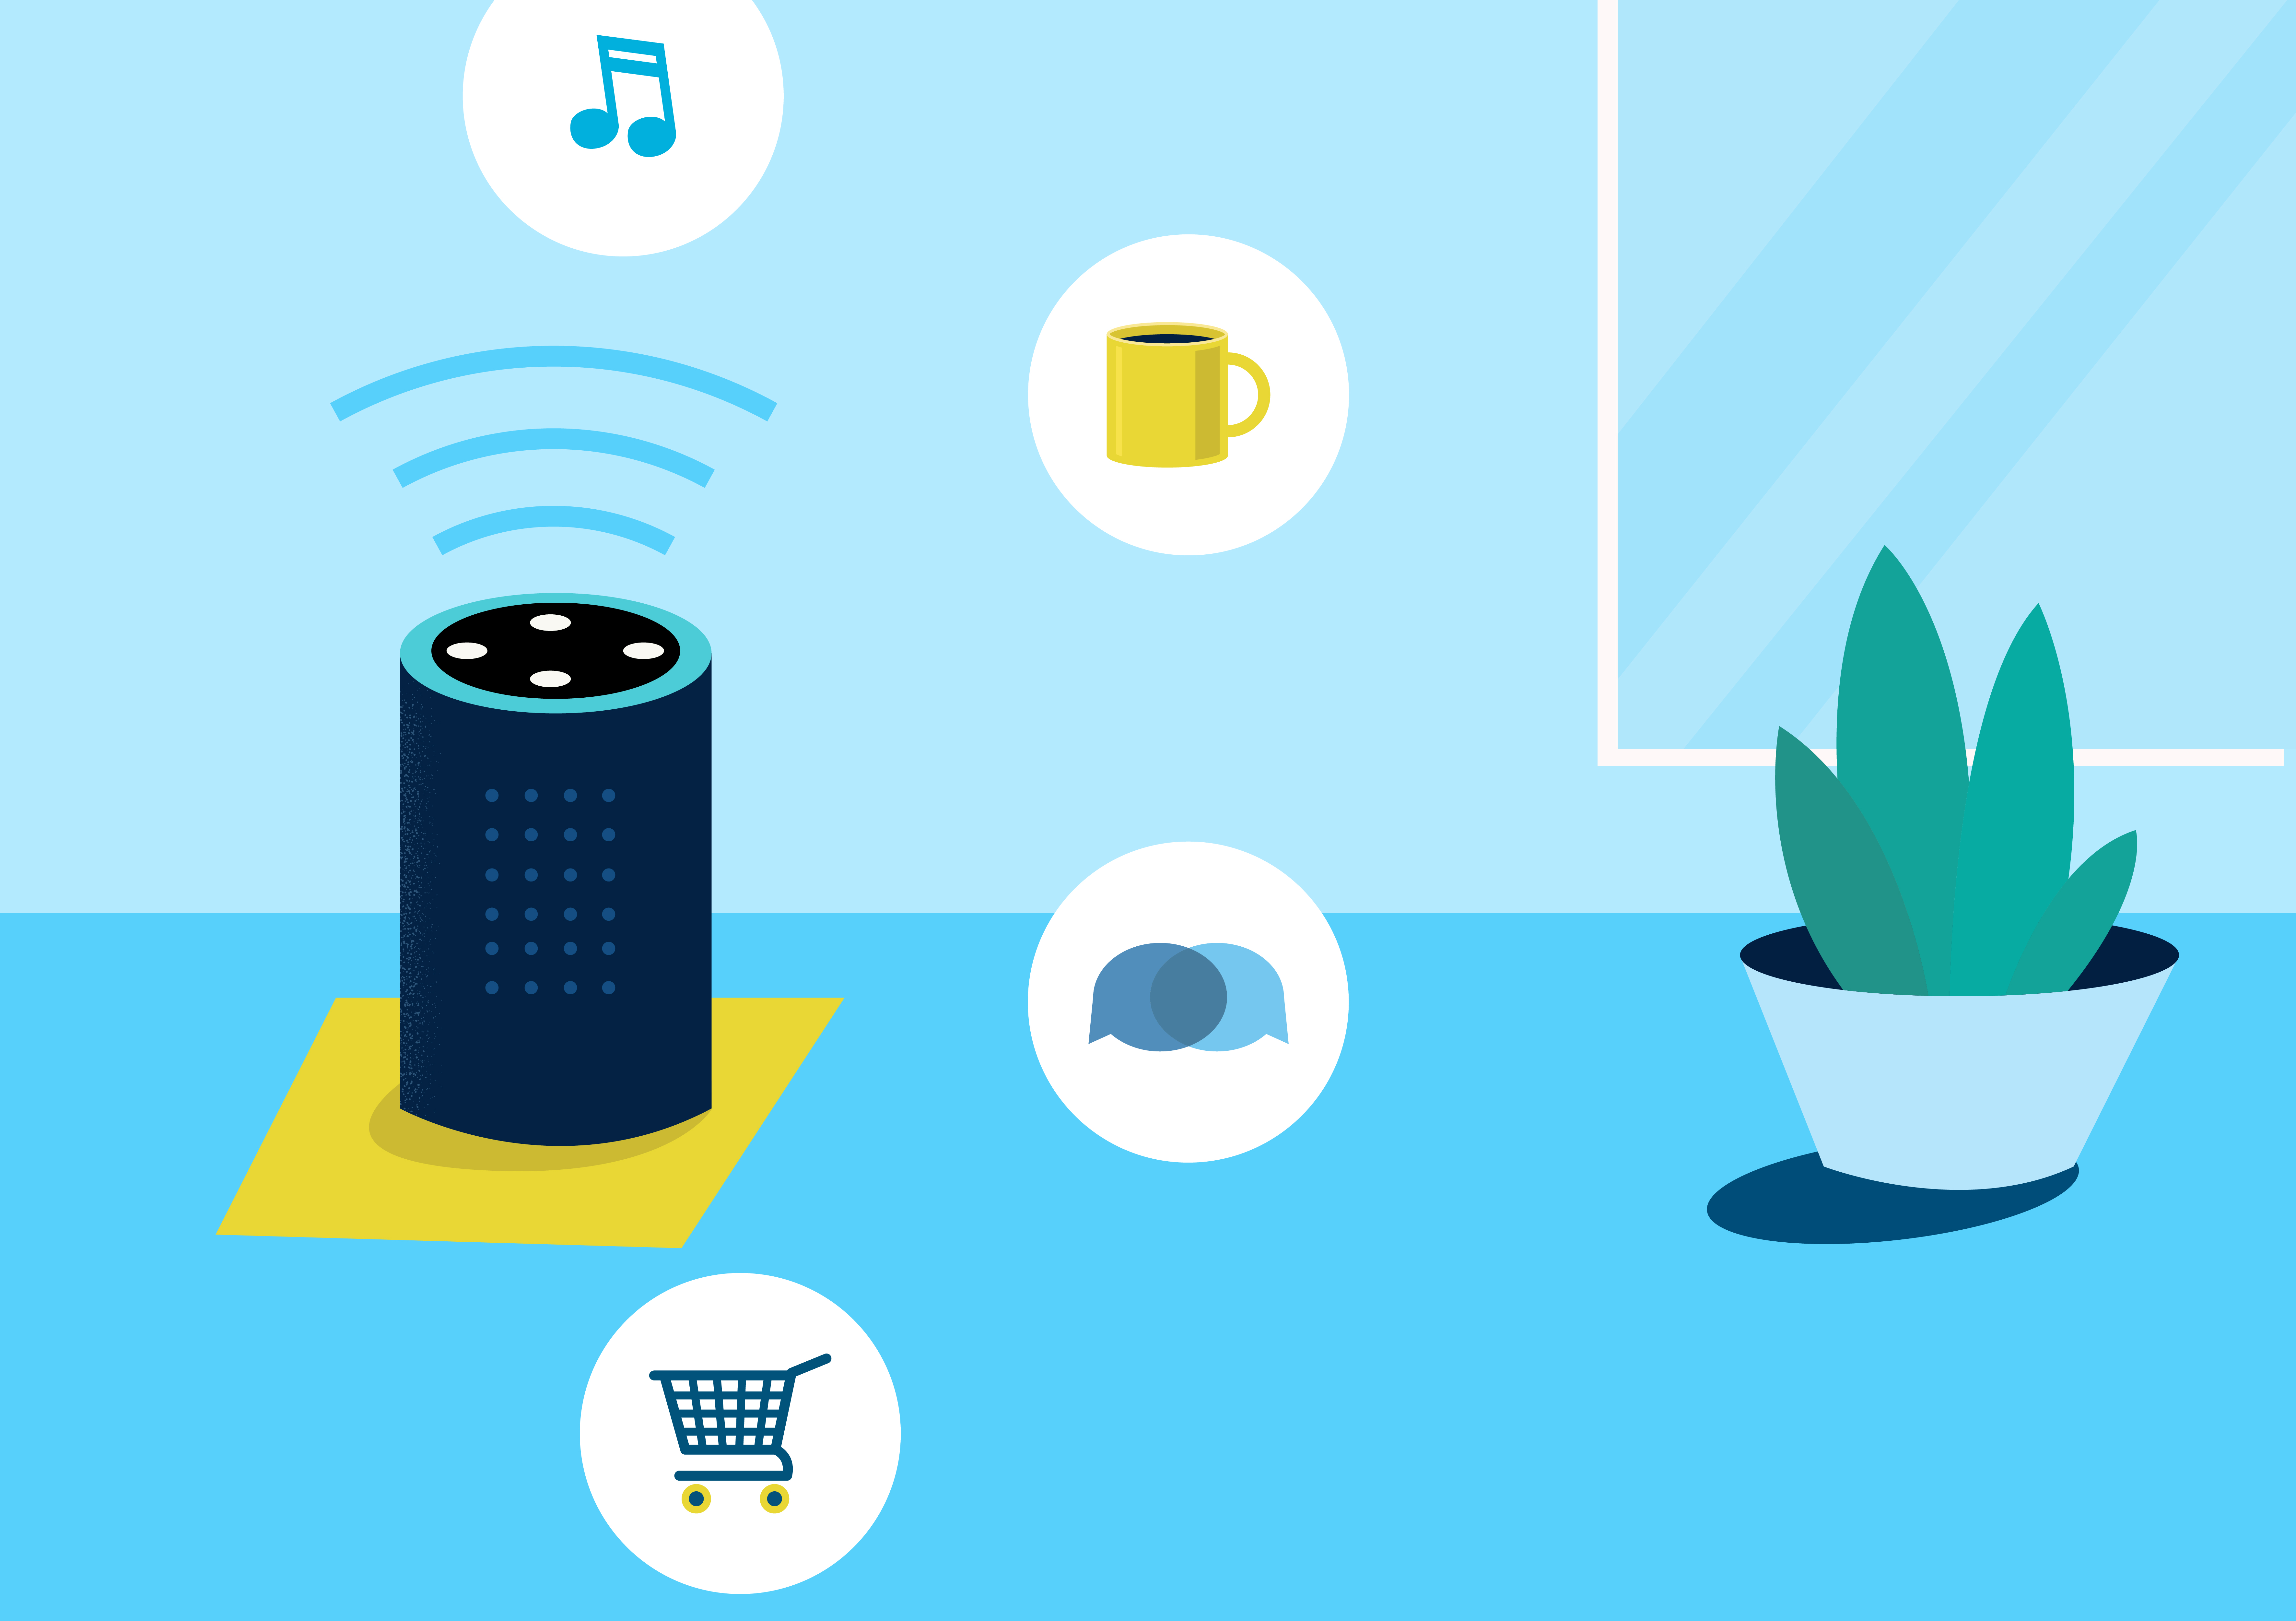 Alternative Spaces Blog | Amazon Echo Tips to Fresh Your with the Smart Speaker - Alternative